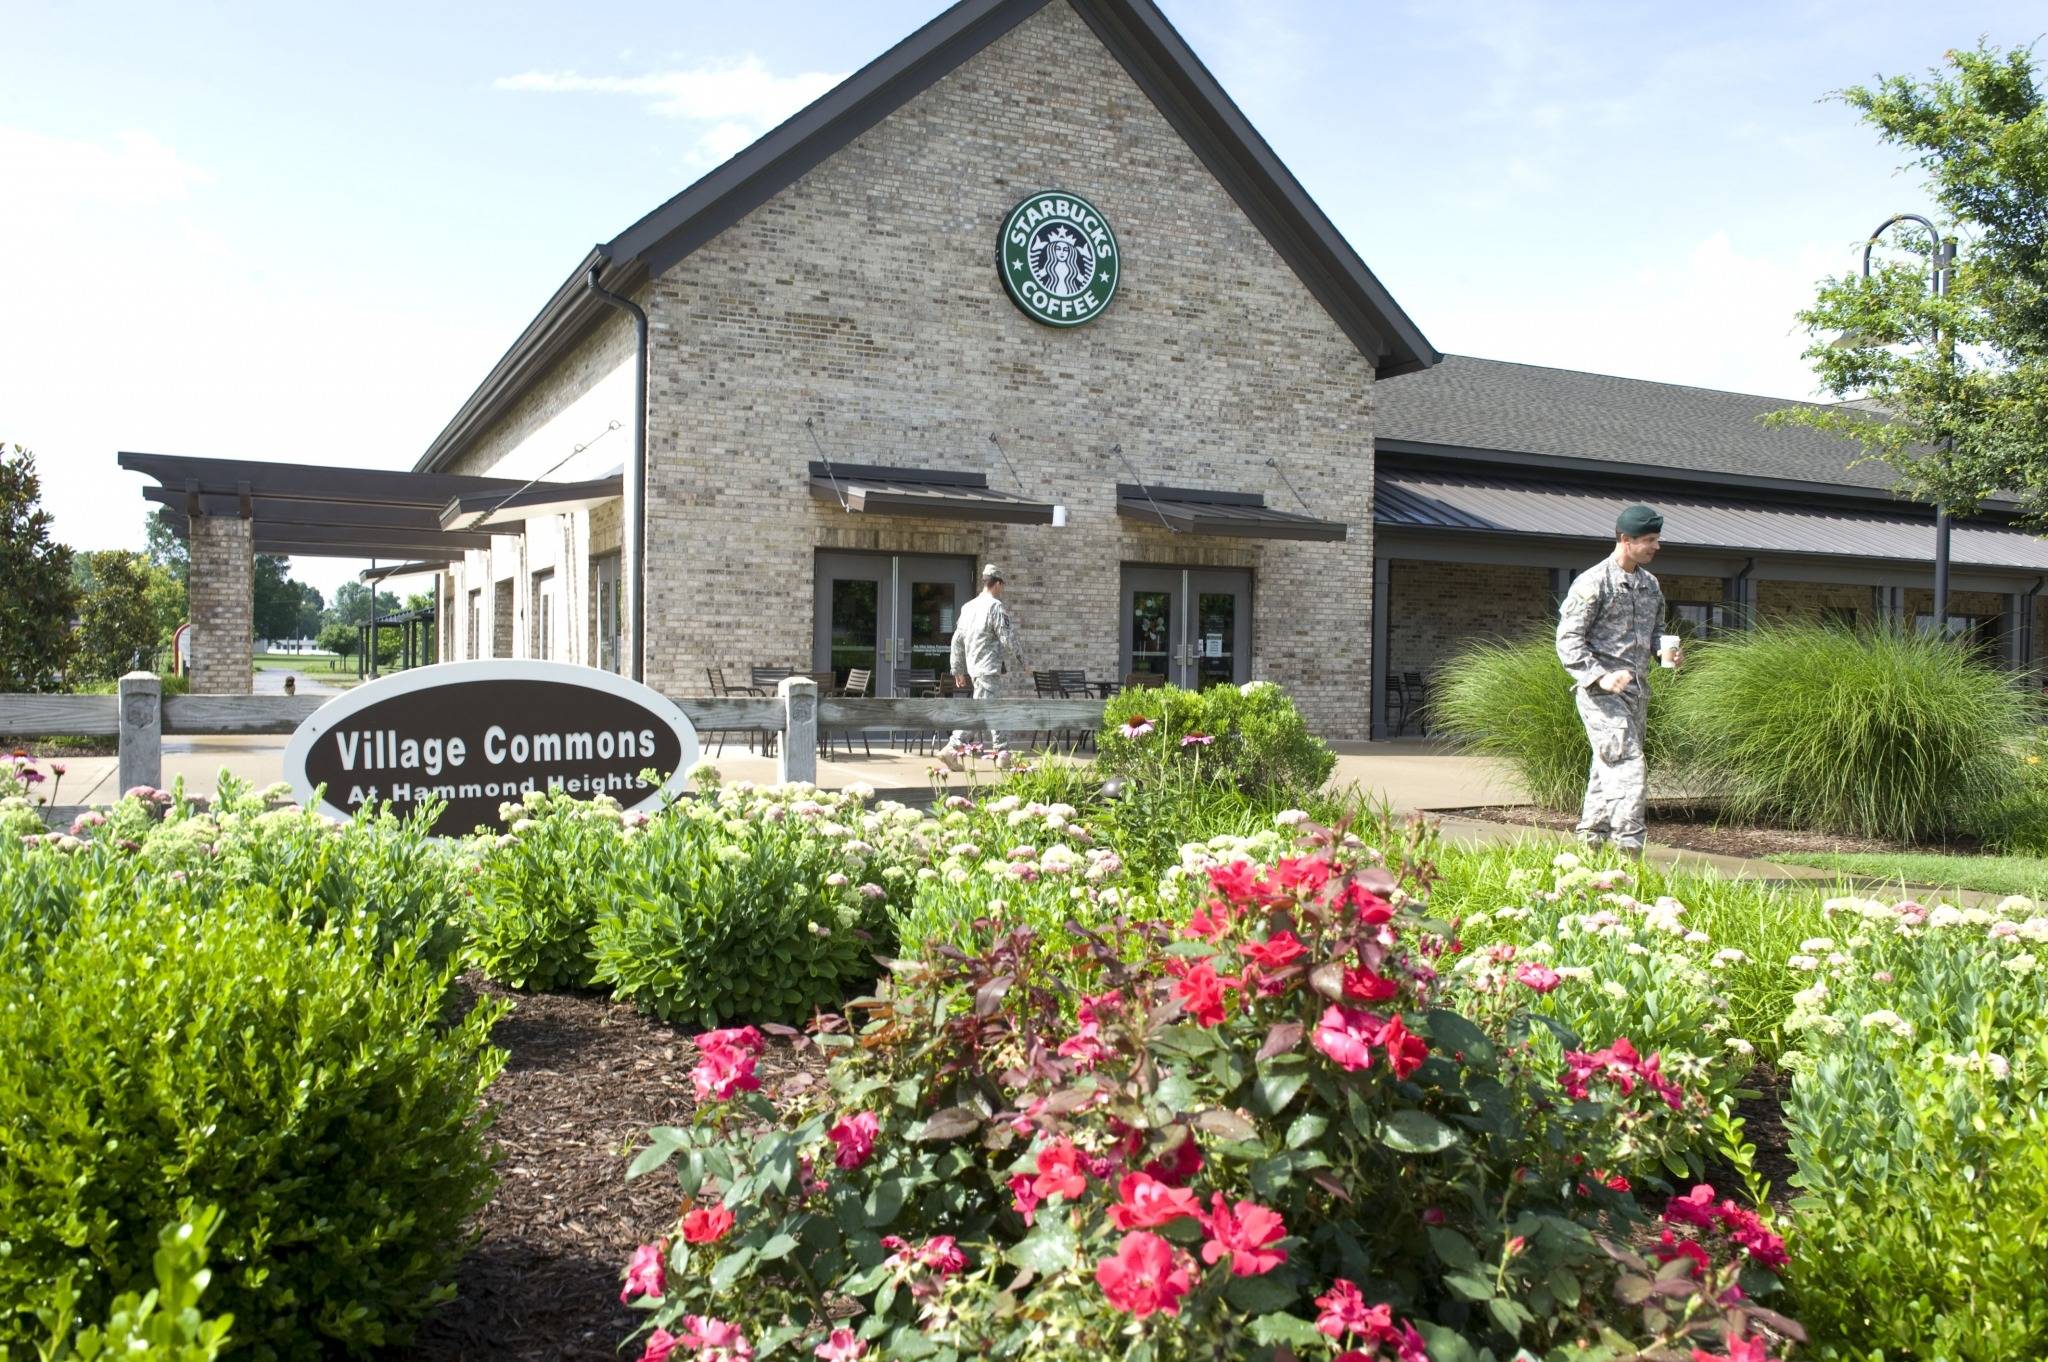 Soldiers walking outside clubhouse with Starbucks